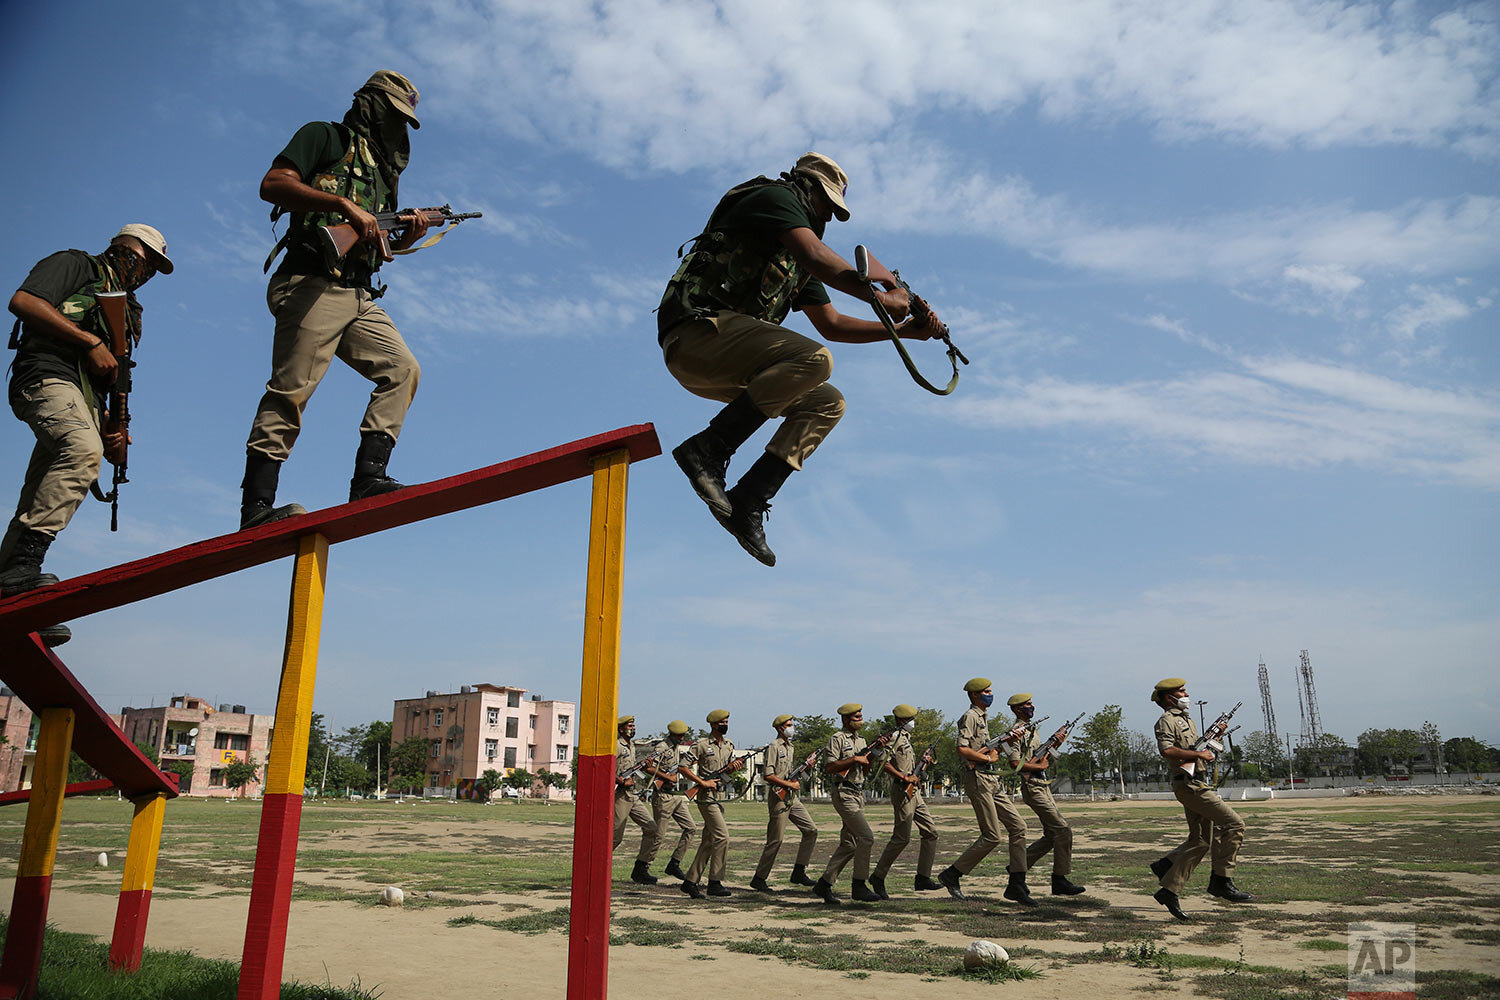  Special police officer recruits, who completed nearly three months of physical training, demonstrate their skills at Kathua in Indian-controlled Kashmir, Saturday, June 5, 2021.  (AP Photo/Channi Anand) 